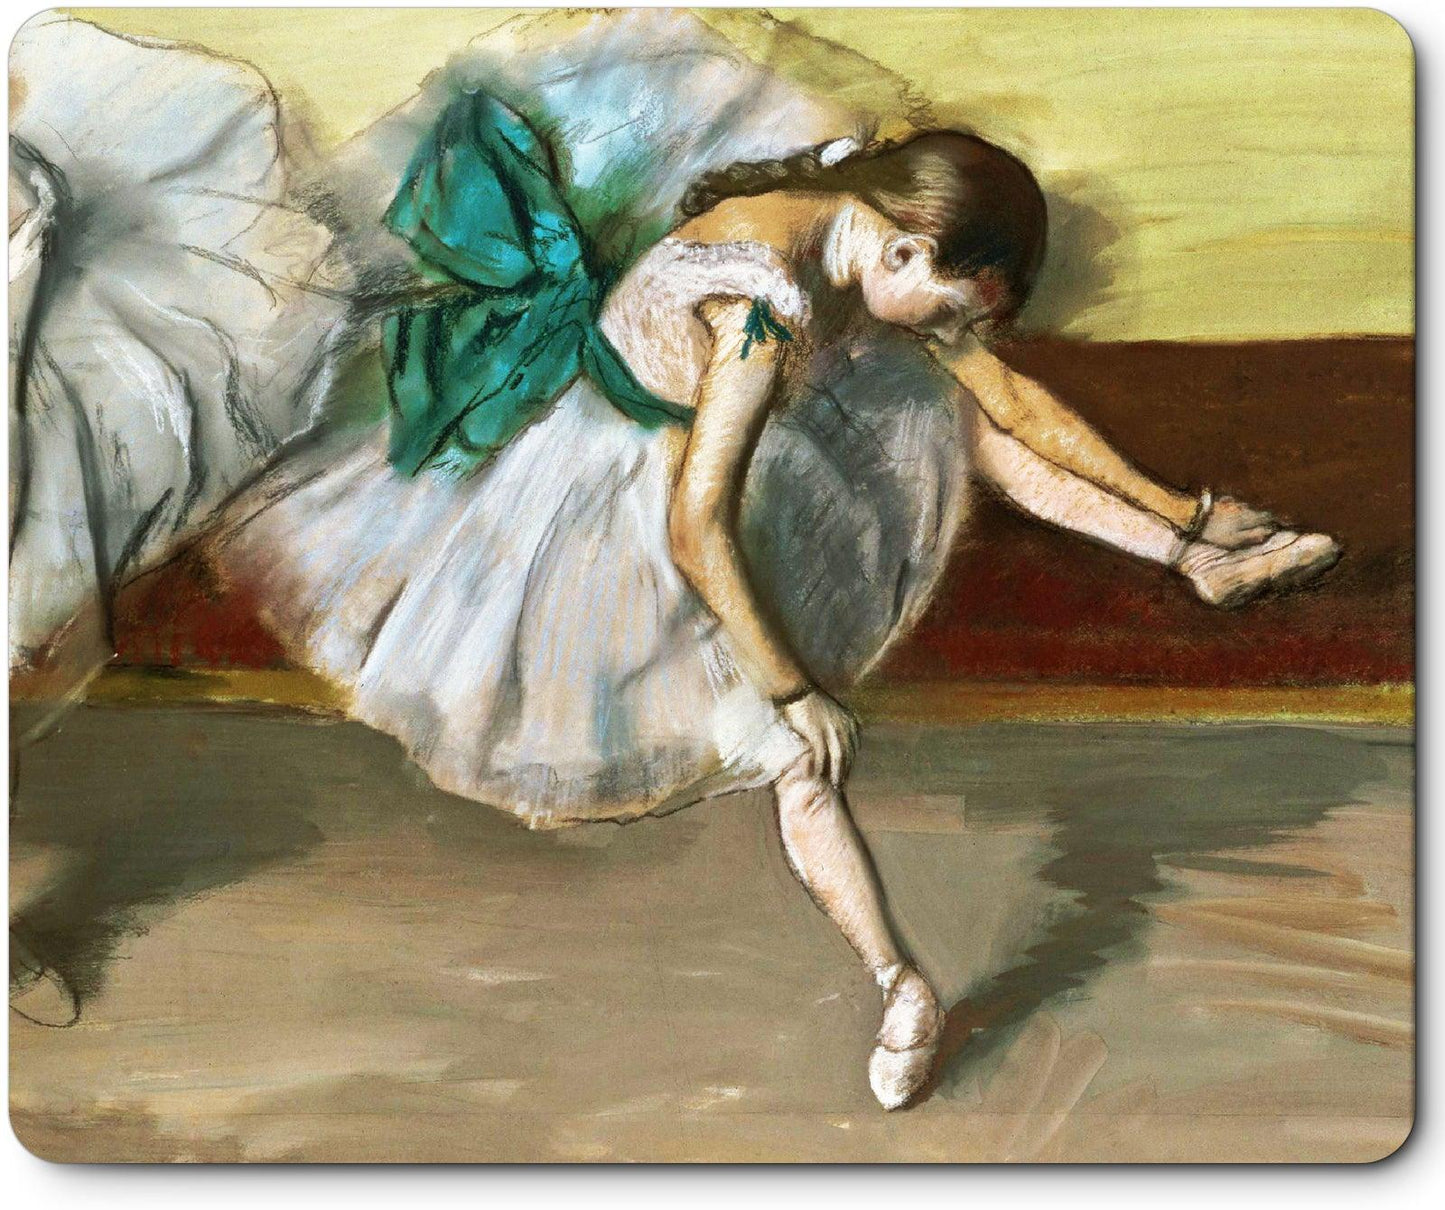 Art Square Mouse Pad 9.5 x 7.9 Inches (Resting Dancer by Edgar Degas) - Berkin Arts